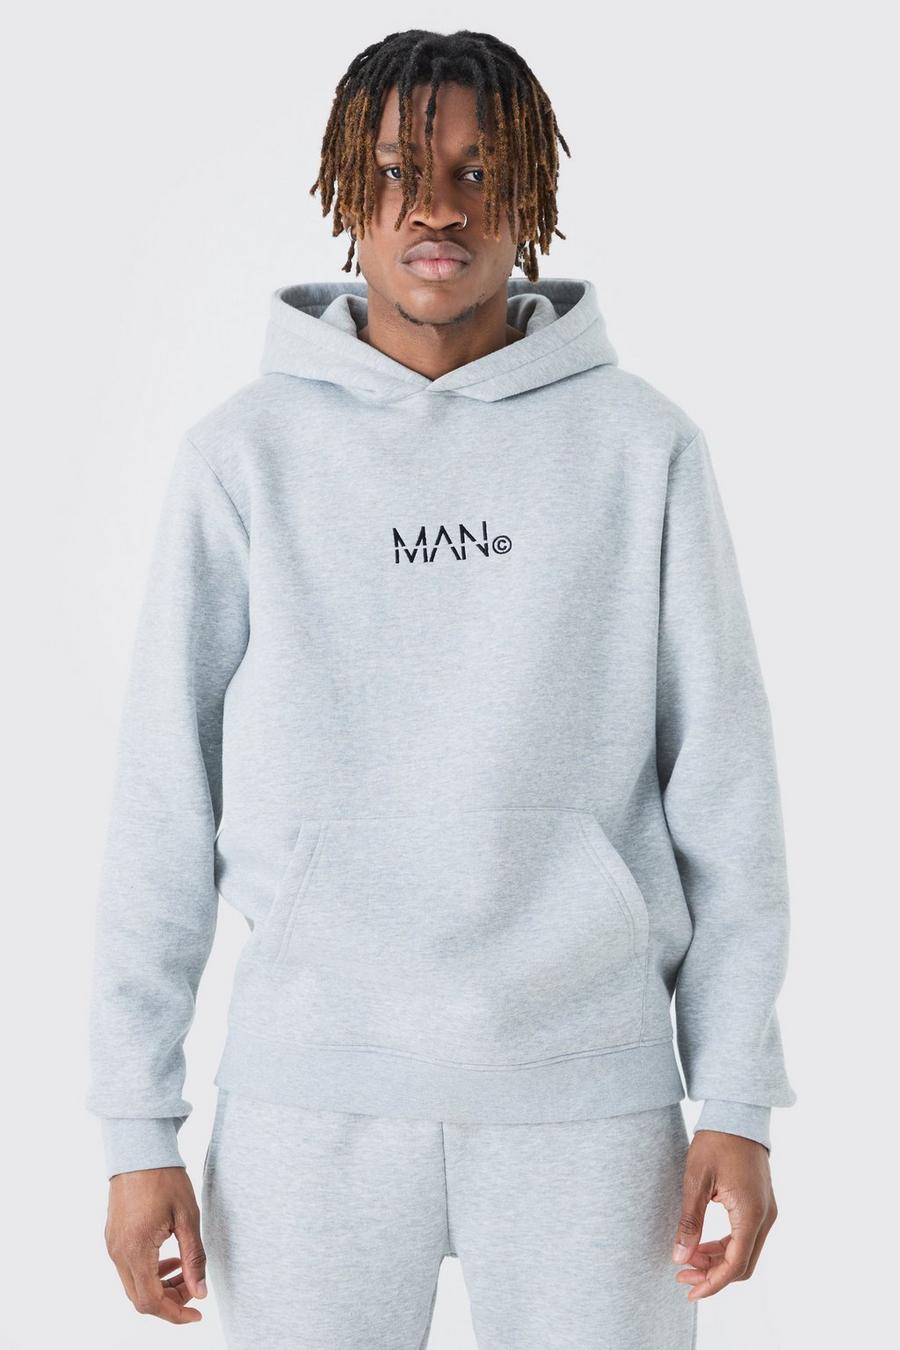 Tall Man Dash Over The Head Hoodie In Grey Marl image number 1